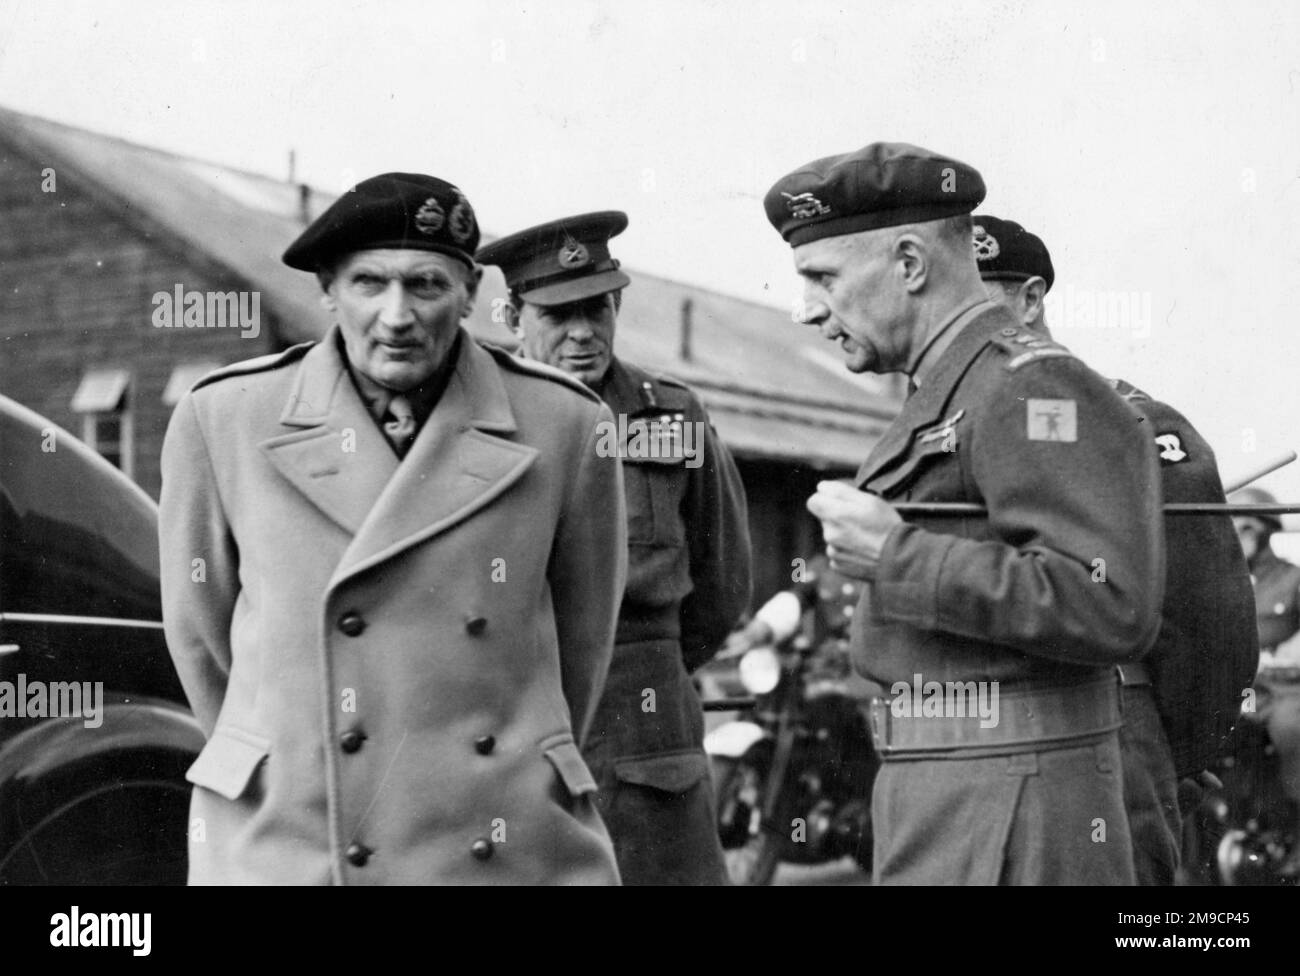 Field Marshal Bernard Law Montgomery, 1st Viscount Montgomery of Alamein (1887-1976), General Richards, and two other officers, probably during an inspection visit to an army camp. Stock Photo